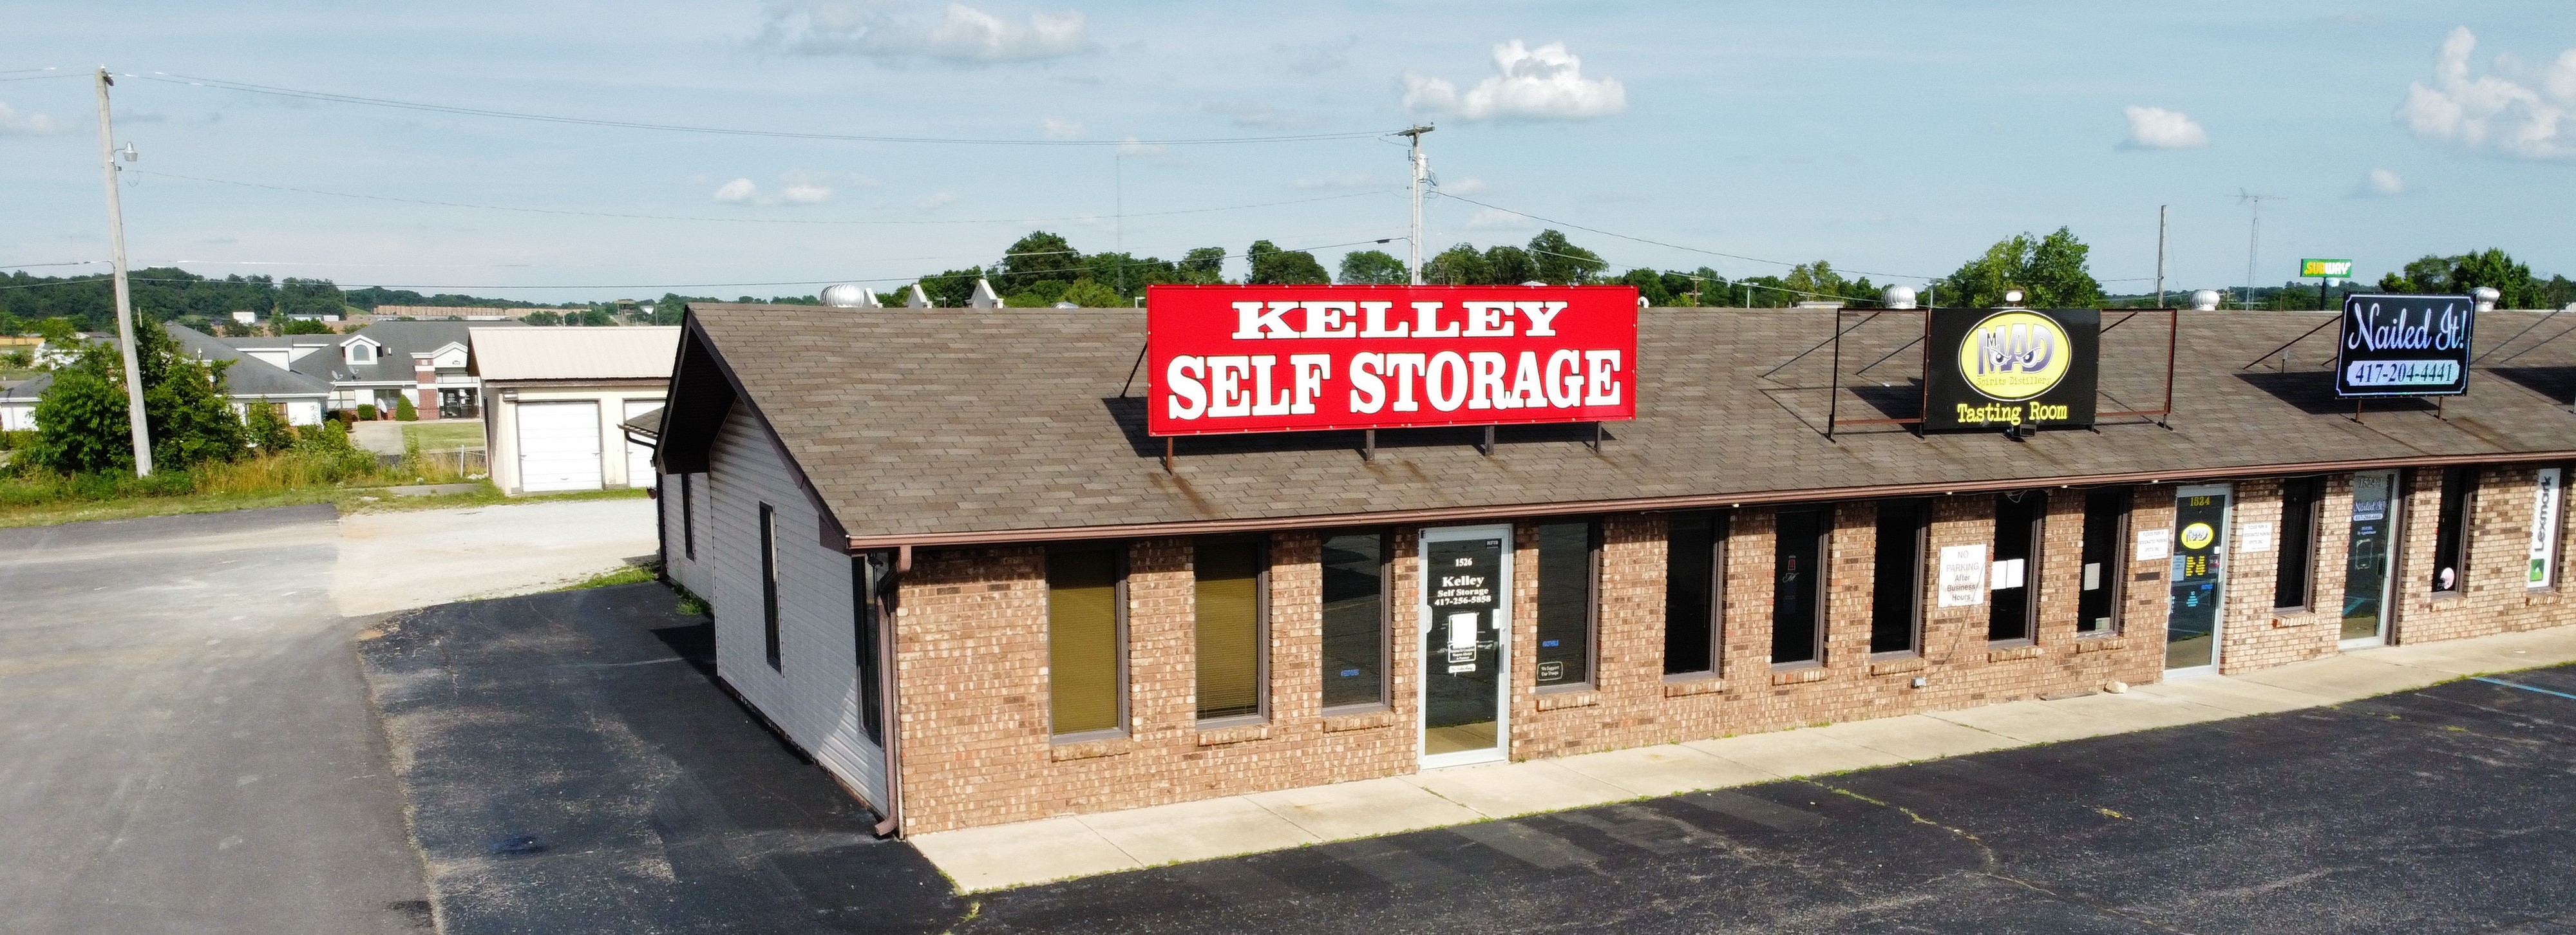 self storage office drive up access units west plains, mo